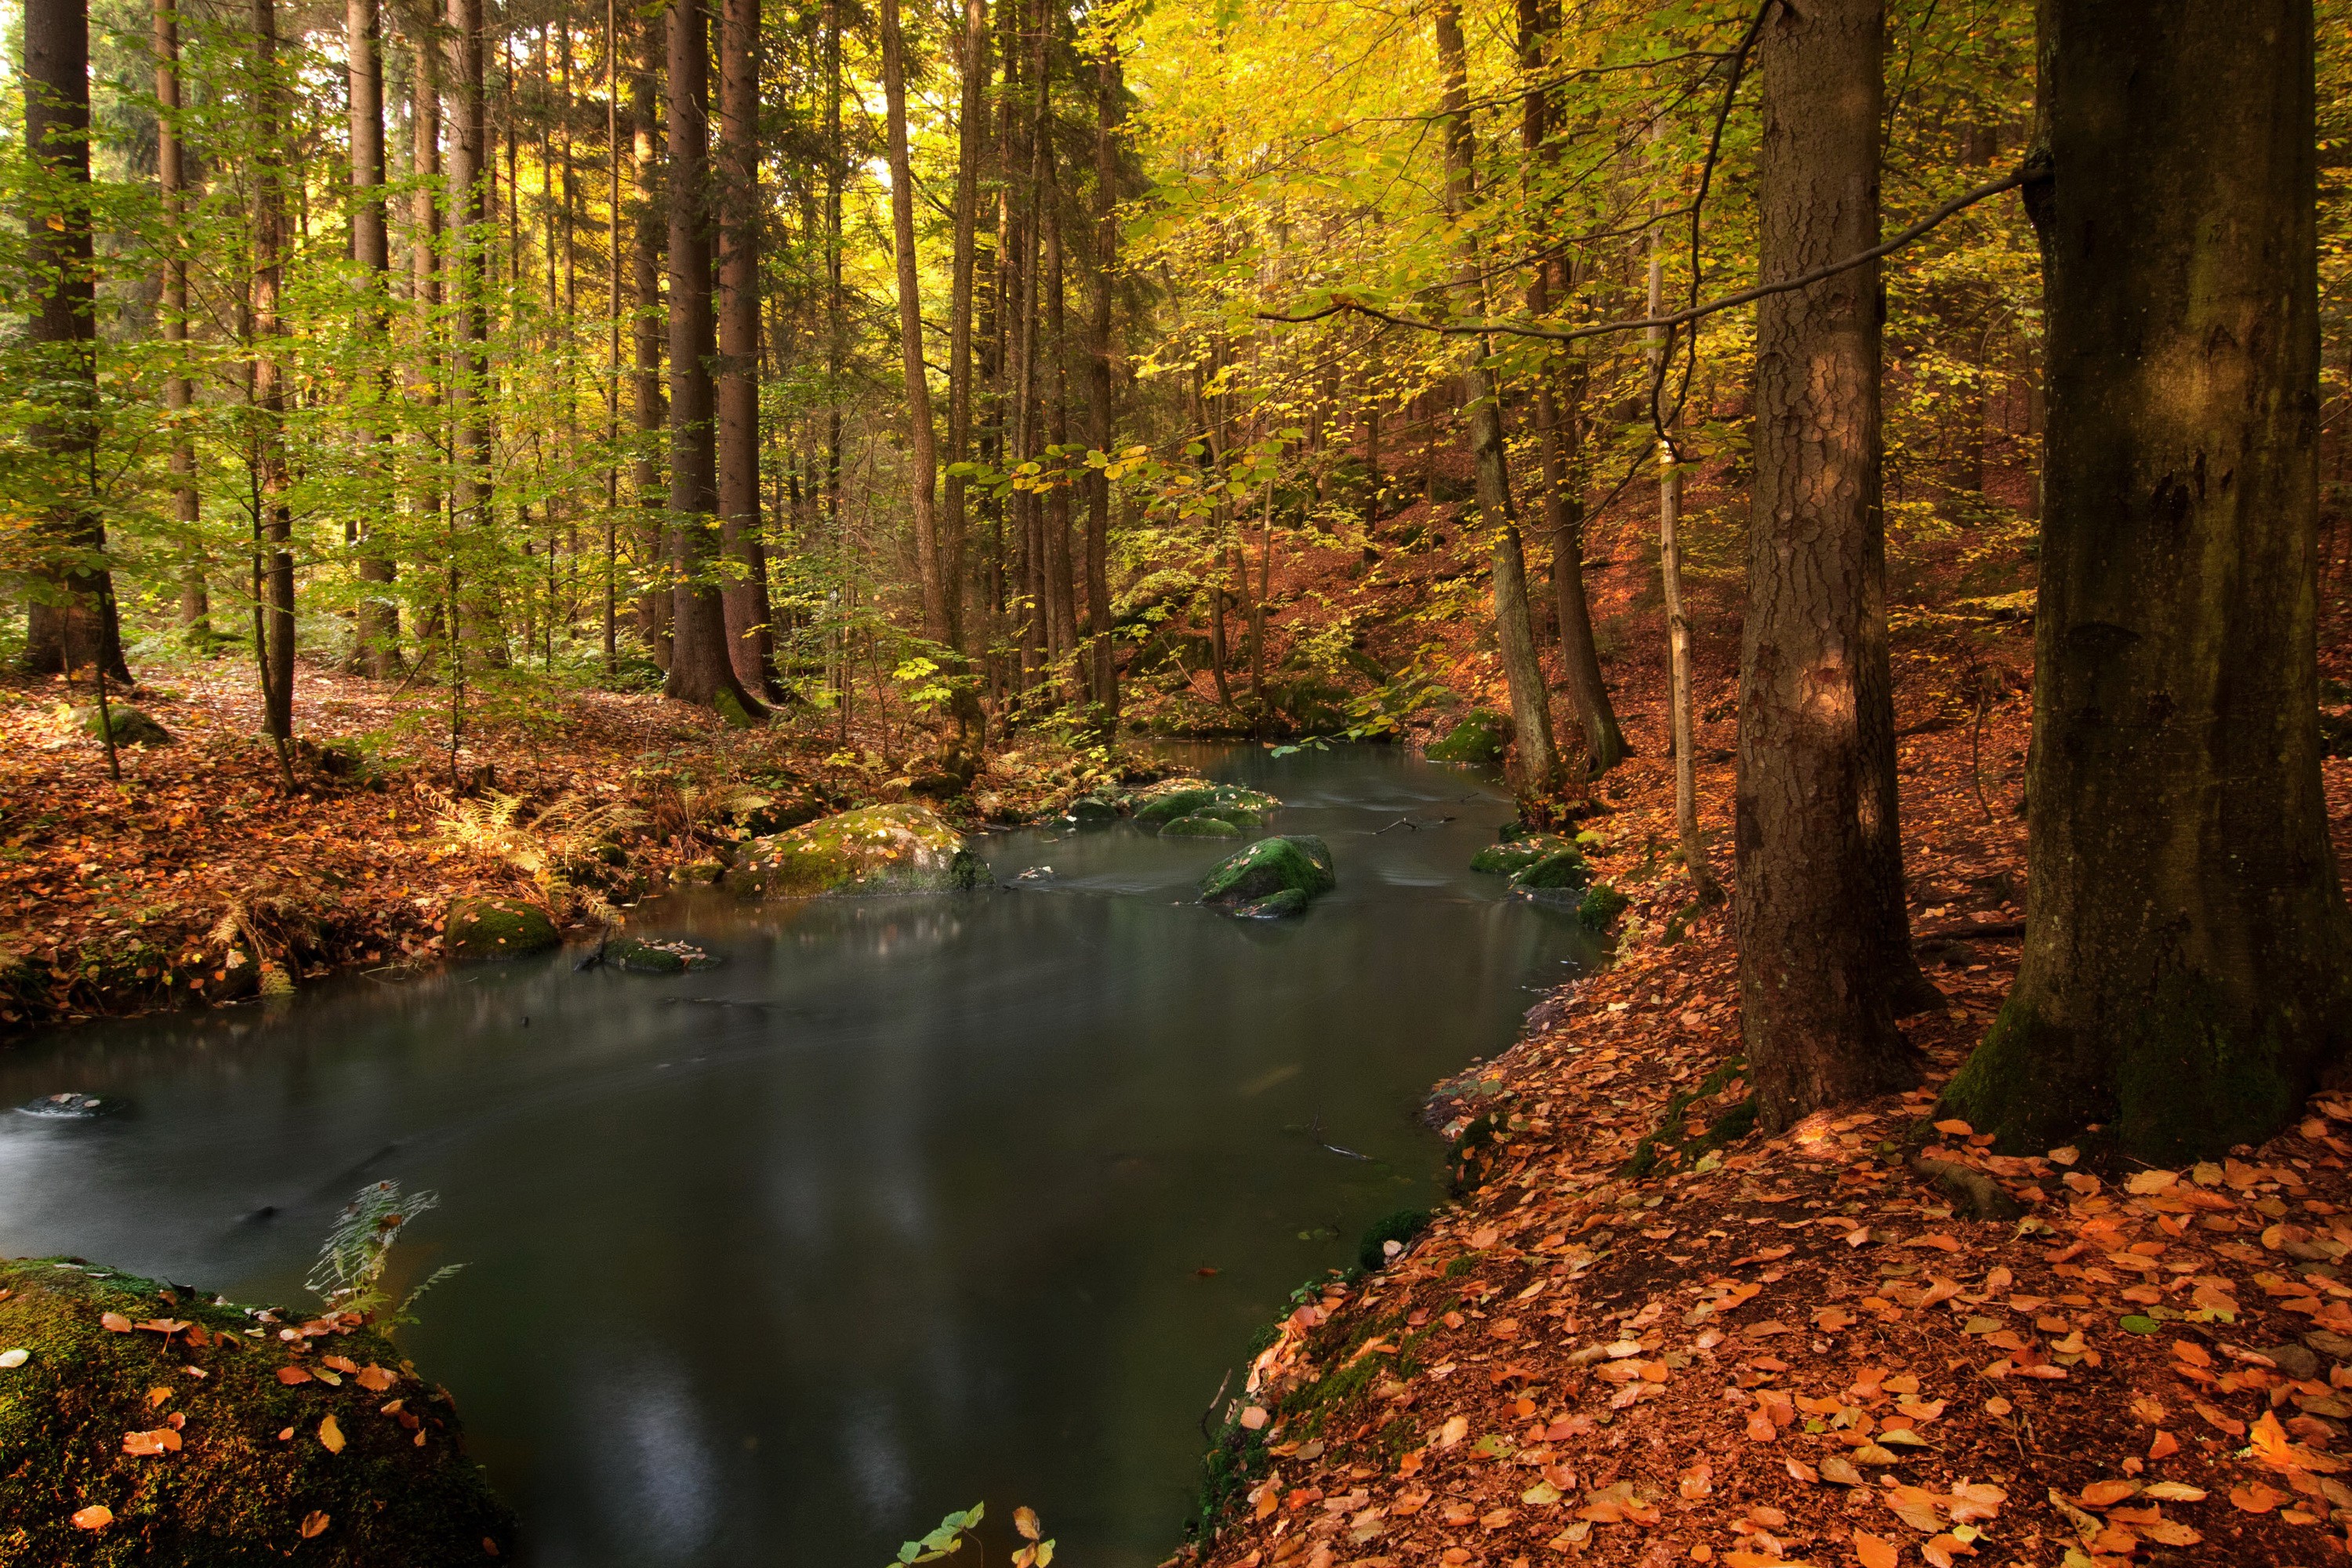 General 3000x2000 forest water nature fall creeks trees fallen leaves